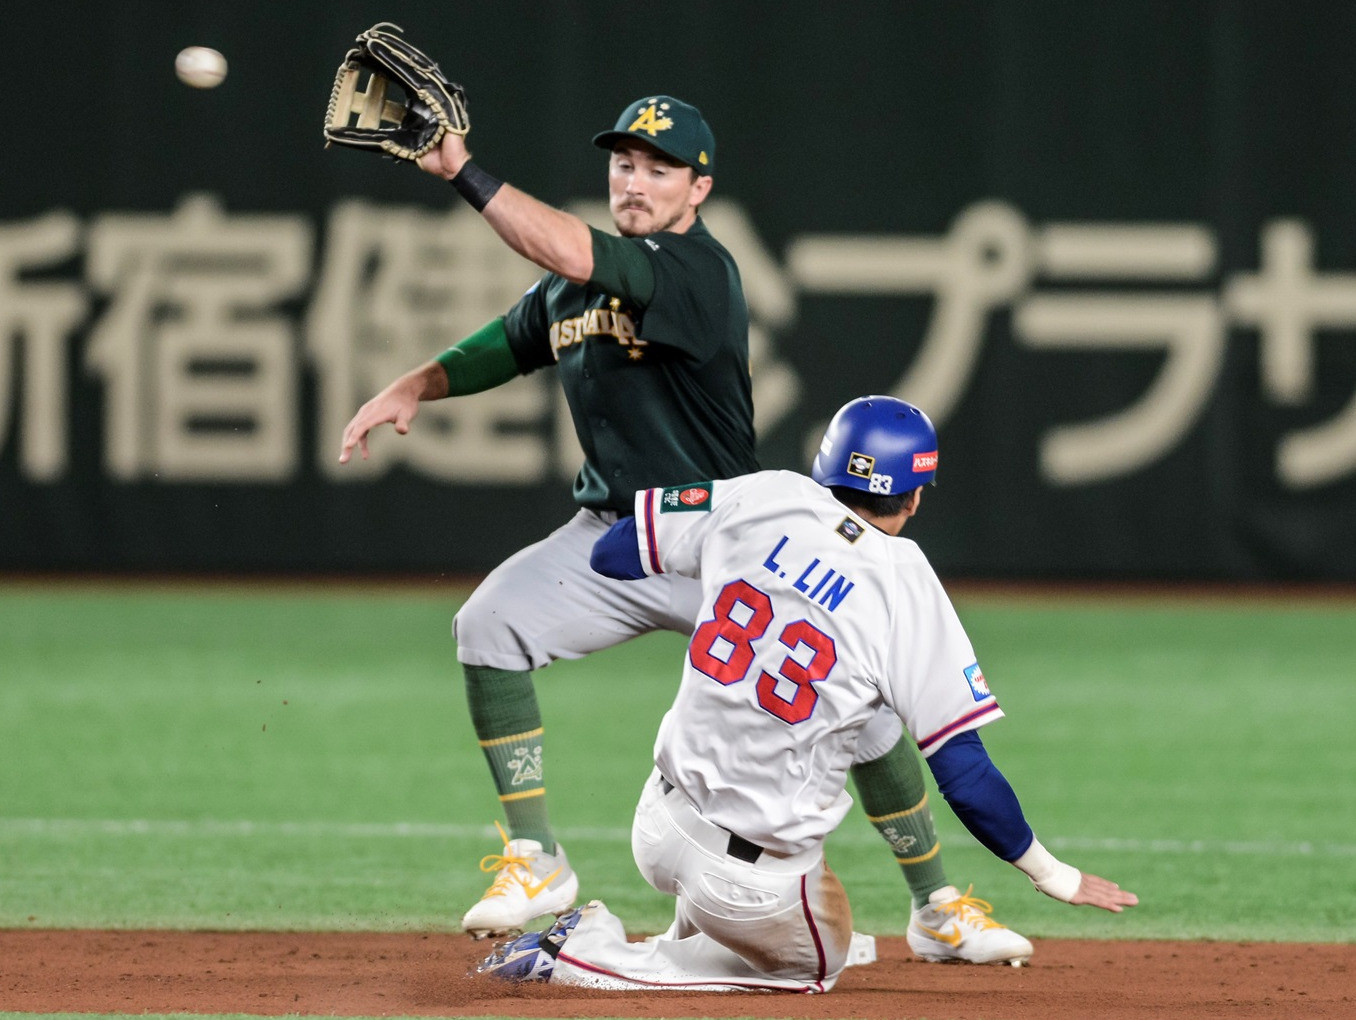 Chinese Taipei's victory against Australia ensures the United States will play Mexico for bronze in Tokyo ©WBSC